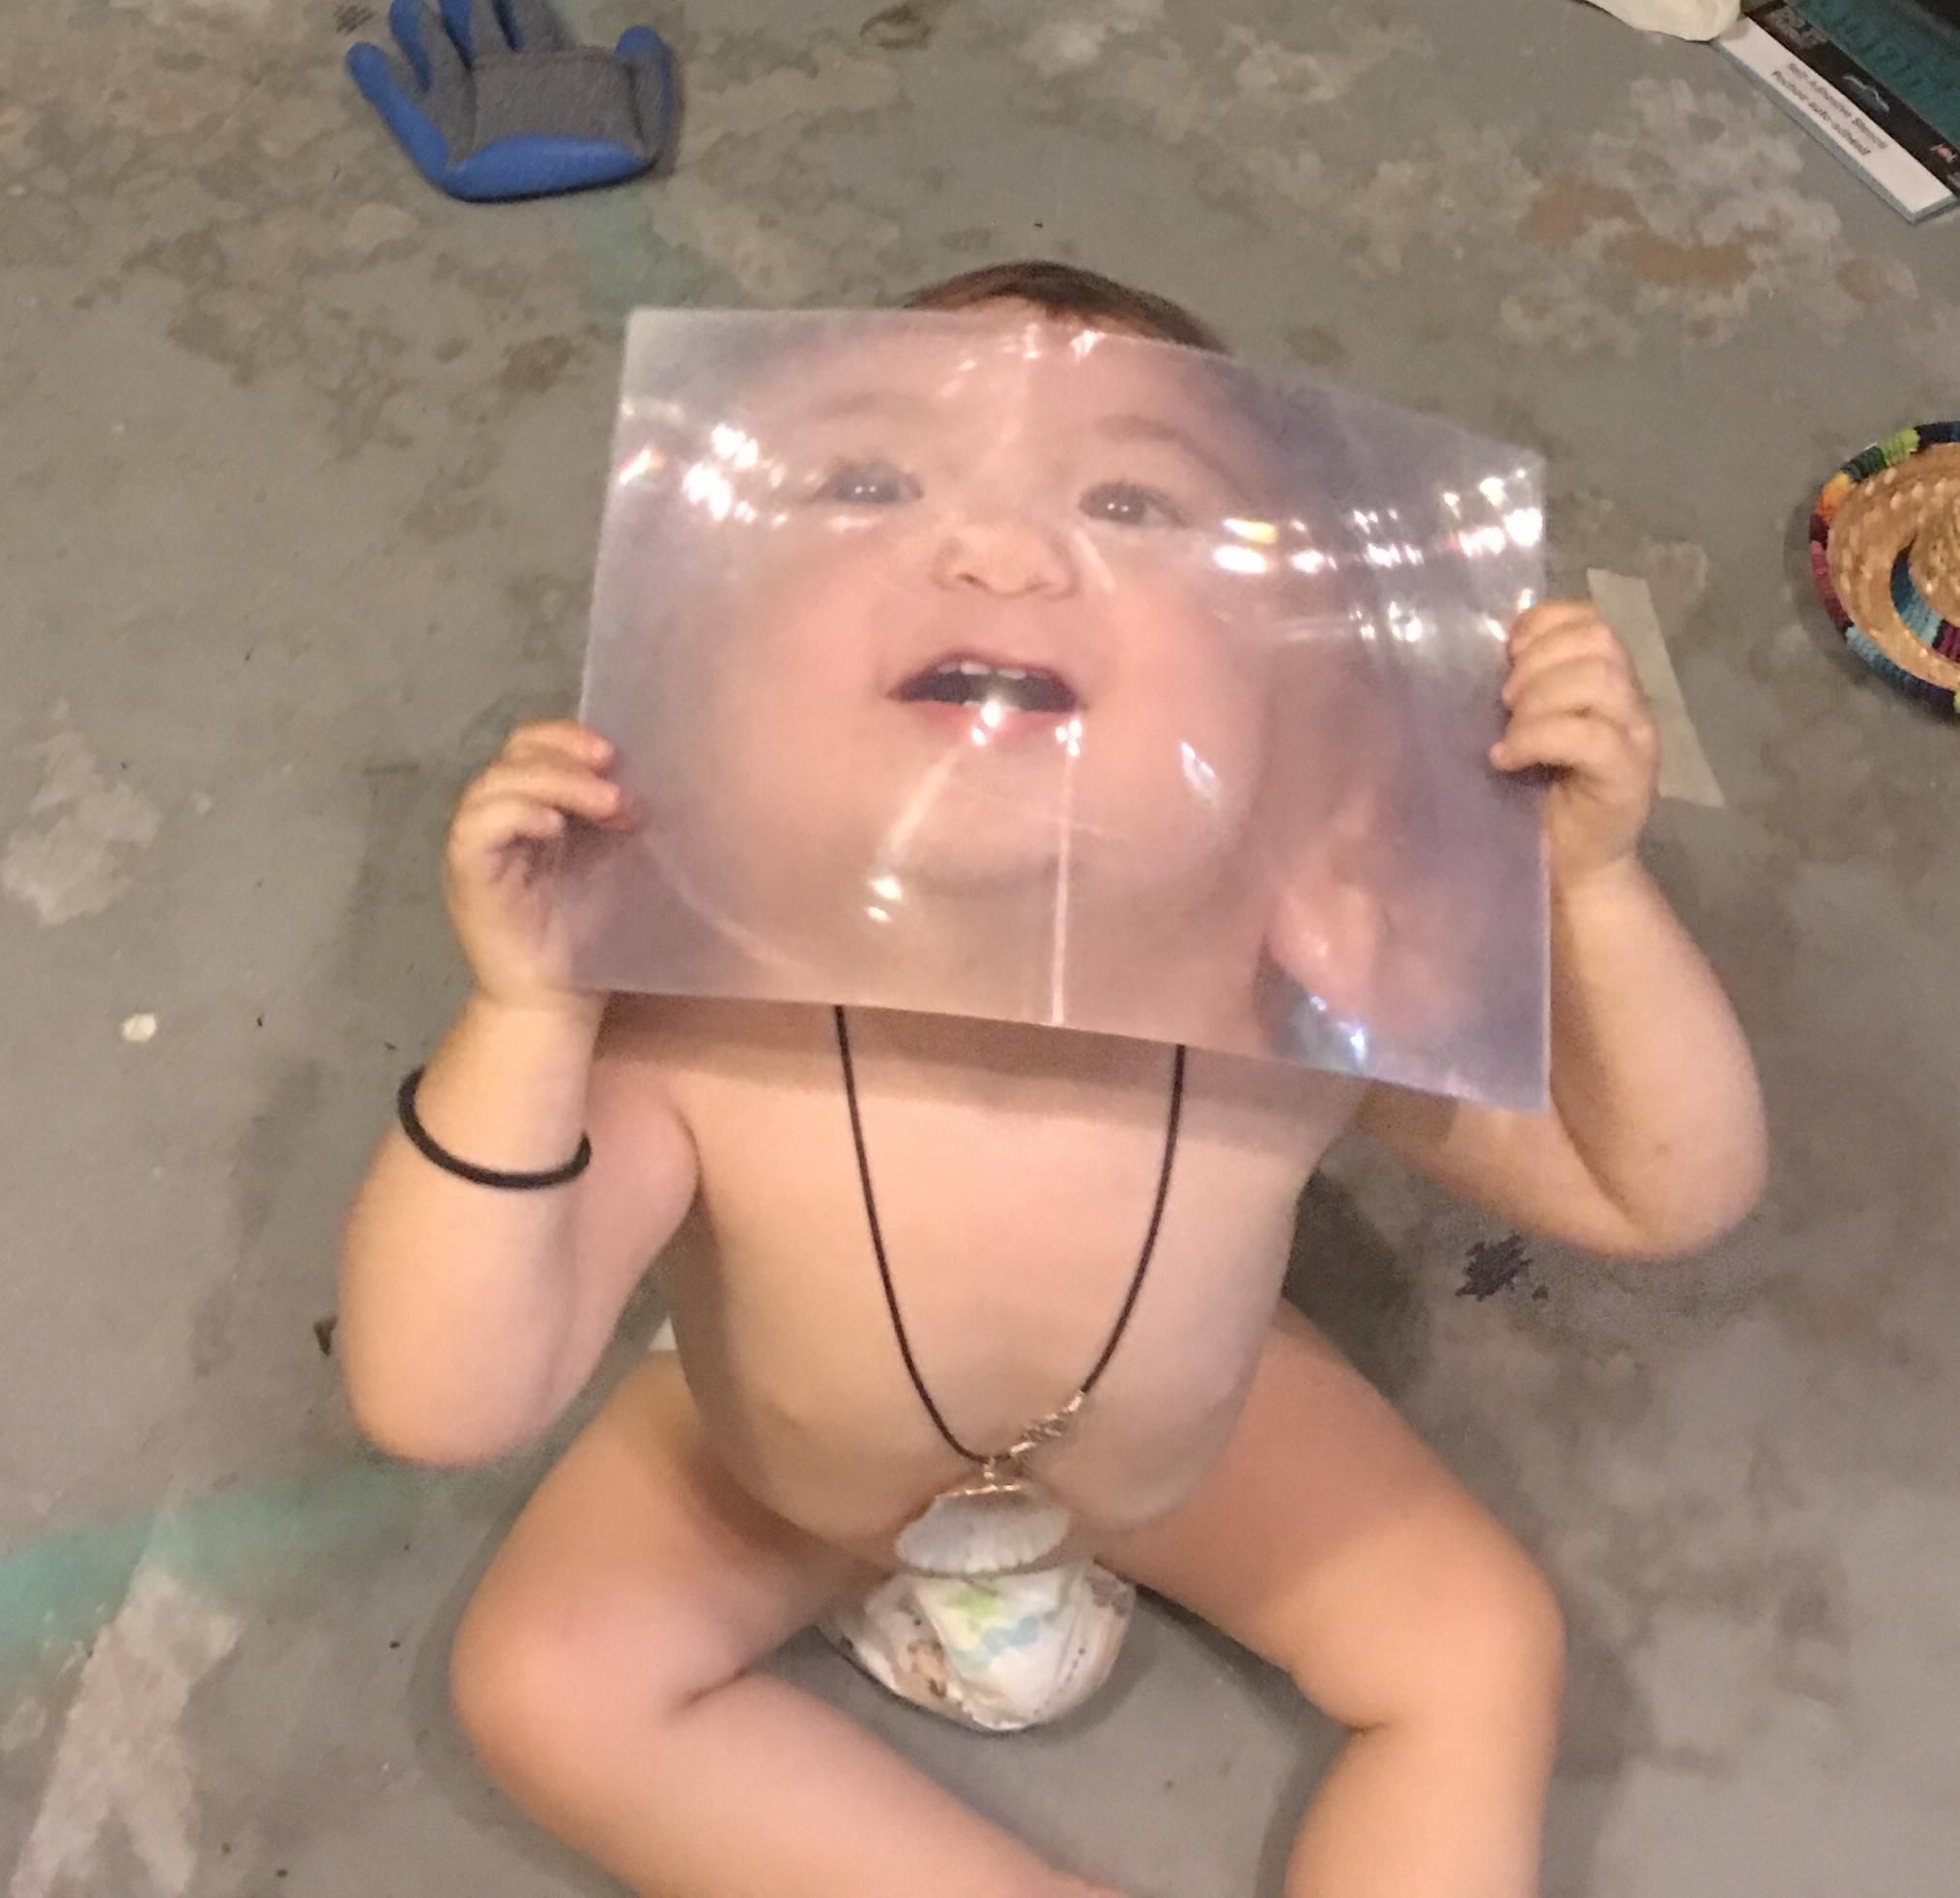 My toddler was helping me clean the garage and discovered I have one of those plastic magnifiers